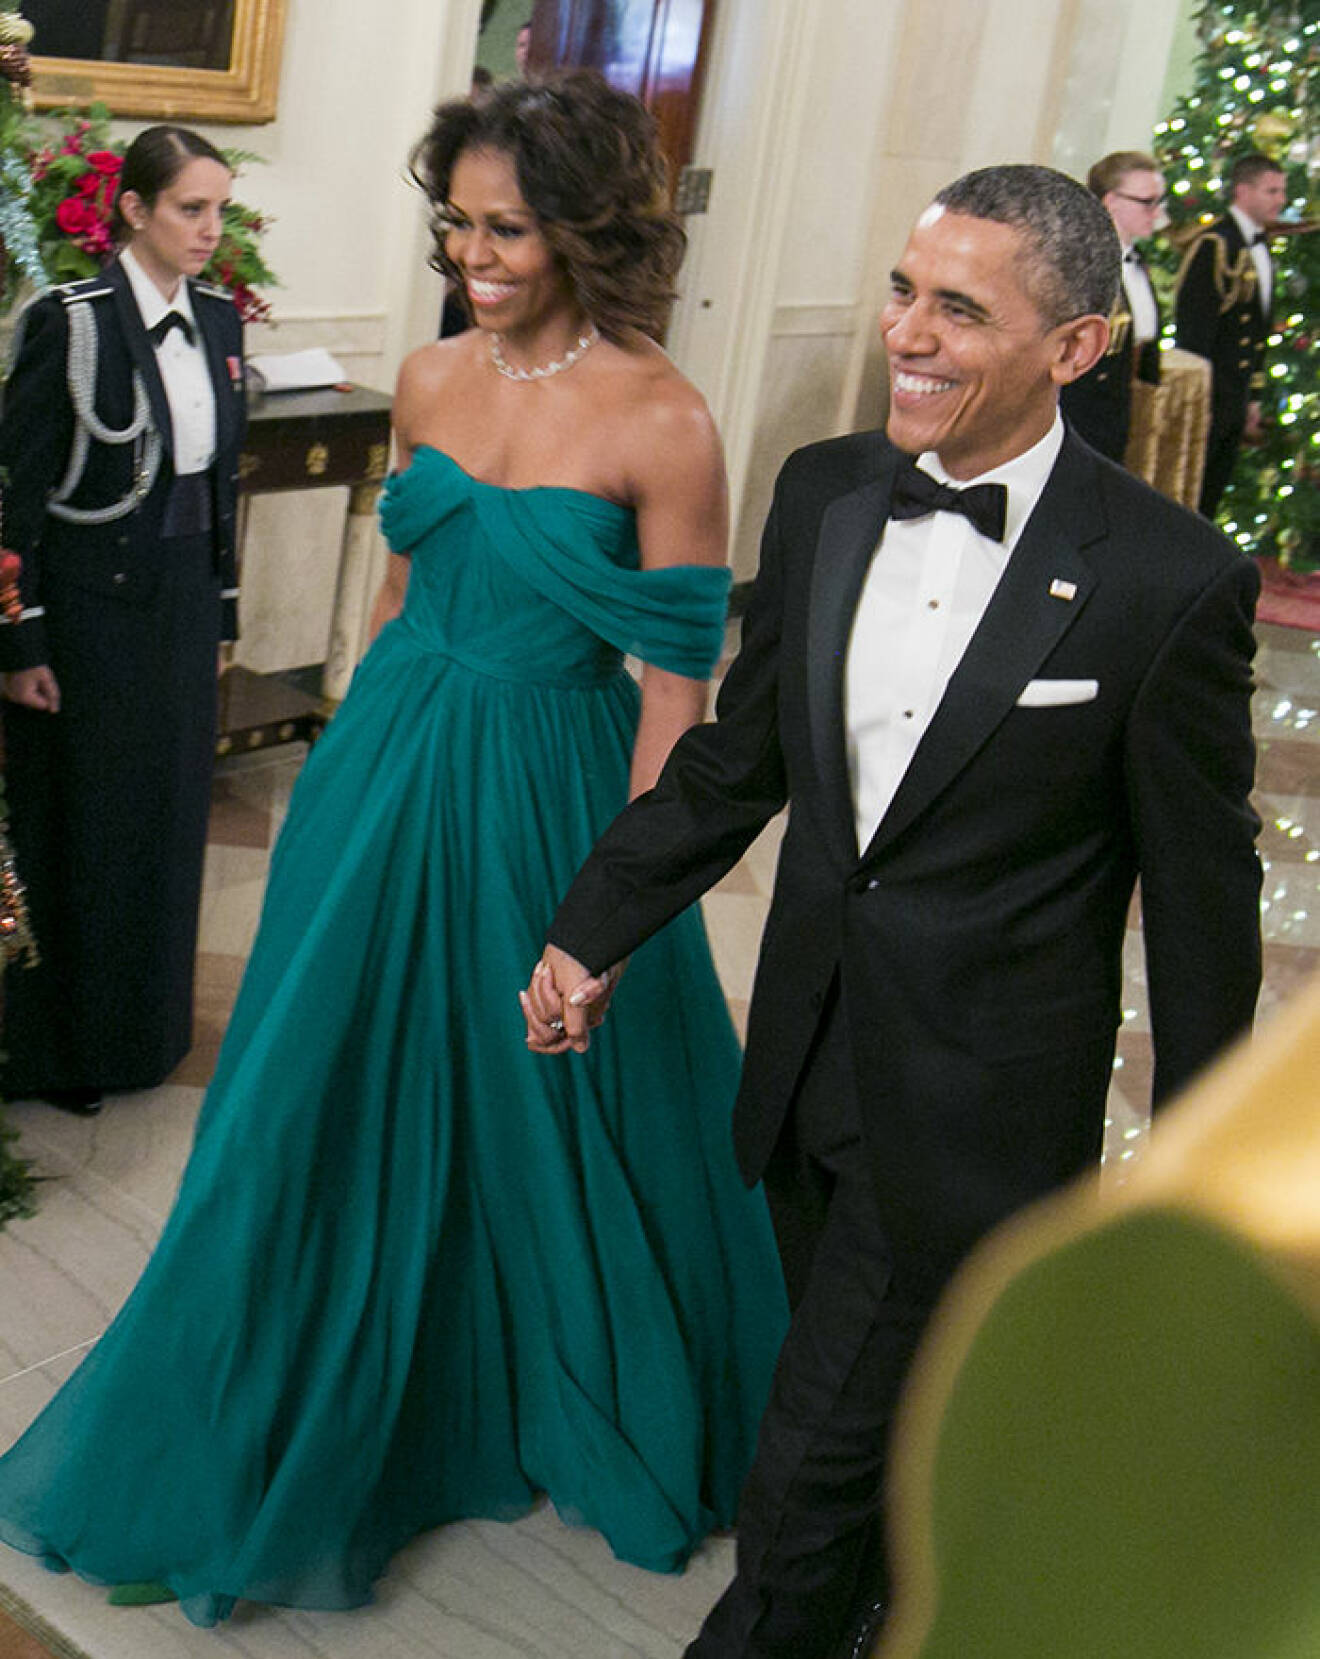 07 December 2013 - Washington D.C. - Michelle Obama, Barack Obama. The 2013 Kennedy Center Honors hosted by United States Secretary of State John F. Kerry at the U.S. Department of State. The 2013 honorees are: opera singer MartinaArroyo; pianist, keyboardist, bandleader and composer HerbieHancock; pianist, singer and songwriter BillyJoel; actress ShirleyMacLaine; and musician and songwriter CarlosSantana. Photo Credit: Ron Sachs/CNP/AdMedia/insight media